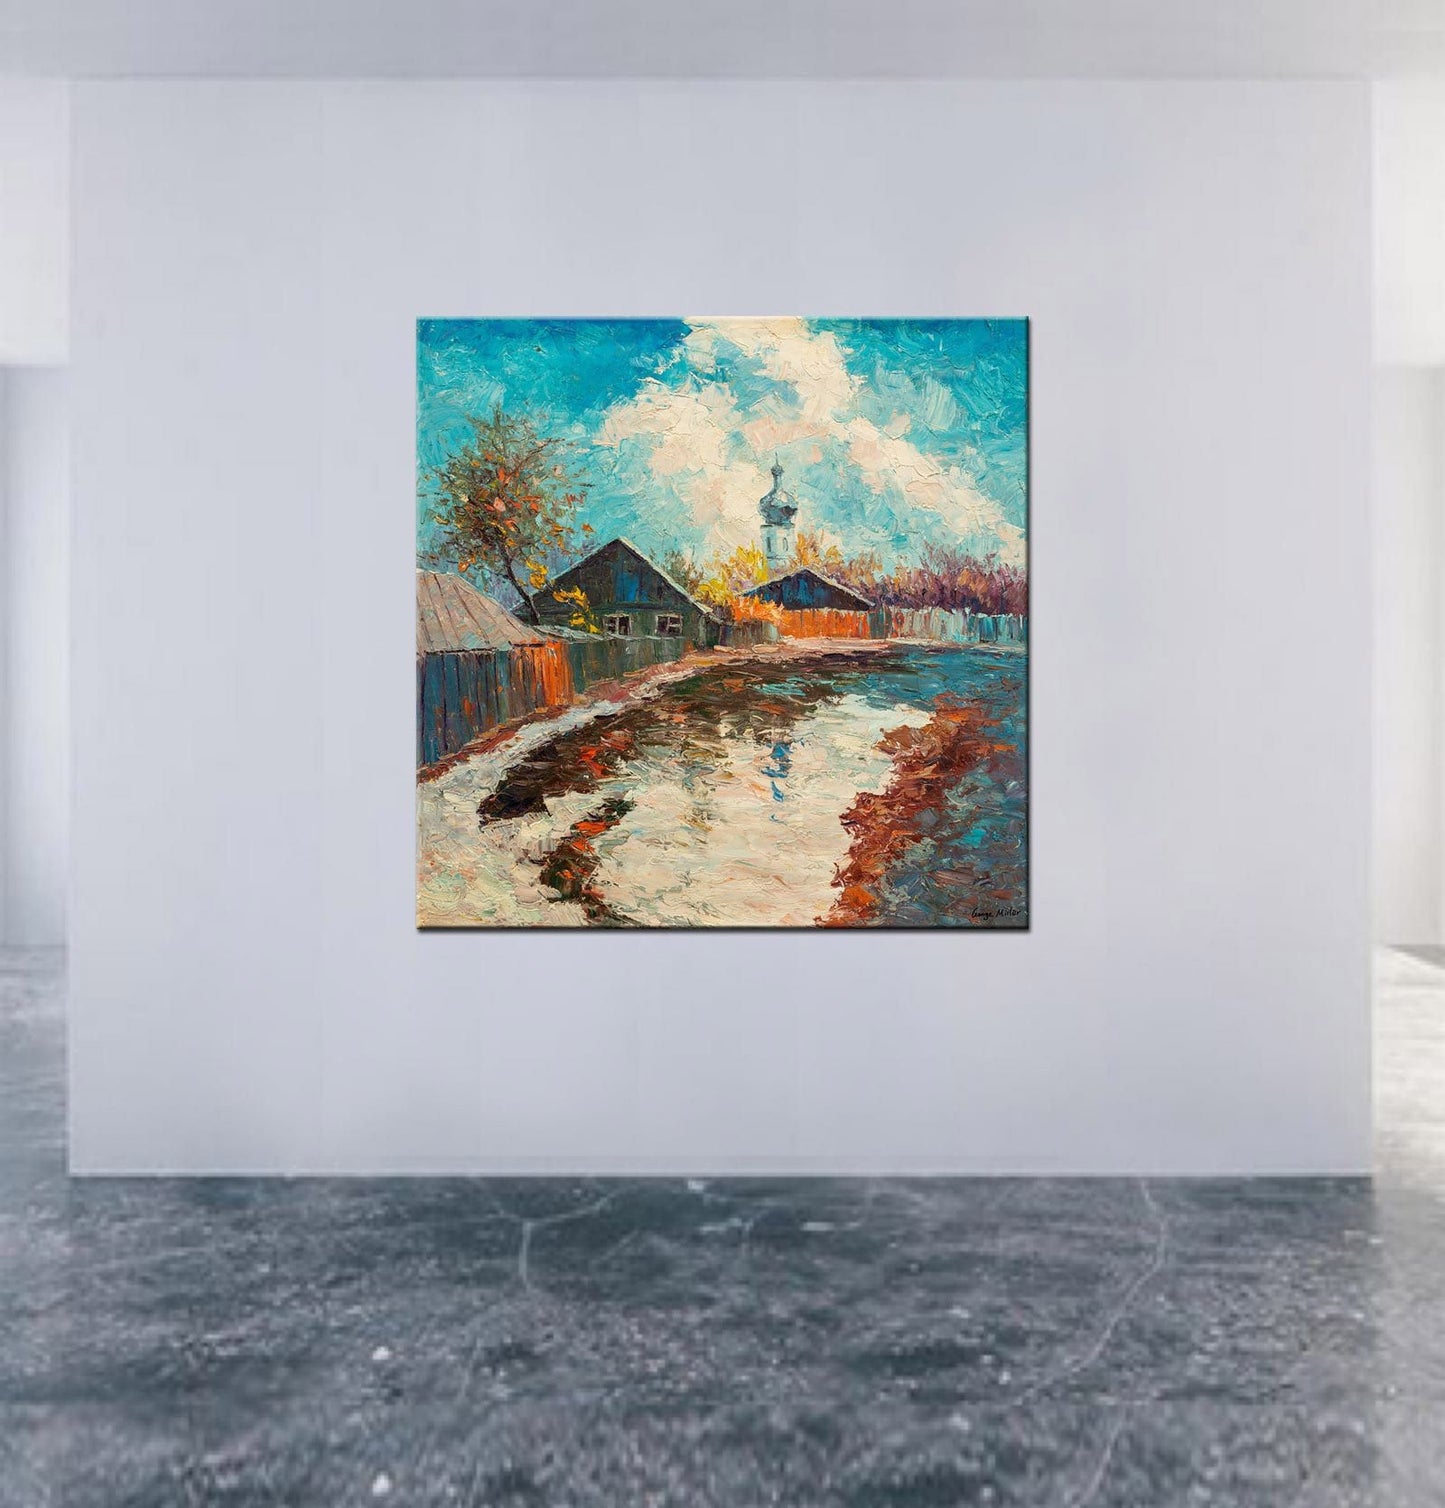 Winter Landscape Oil Painting, Canvas Wall Art, Oil On Canvas Painting, Landscape, Oversized Painting, Modern Wall Art, Impasto Oil Painting